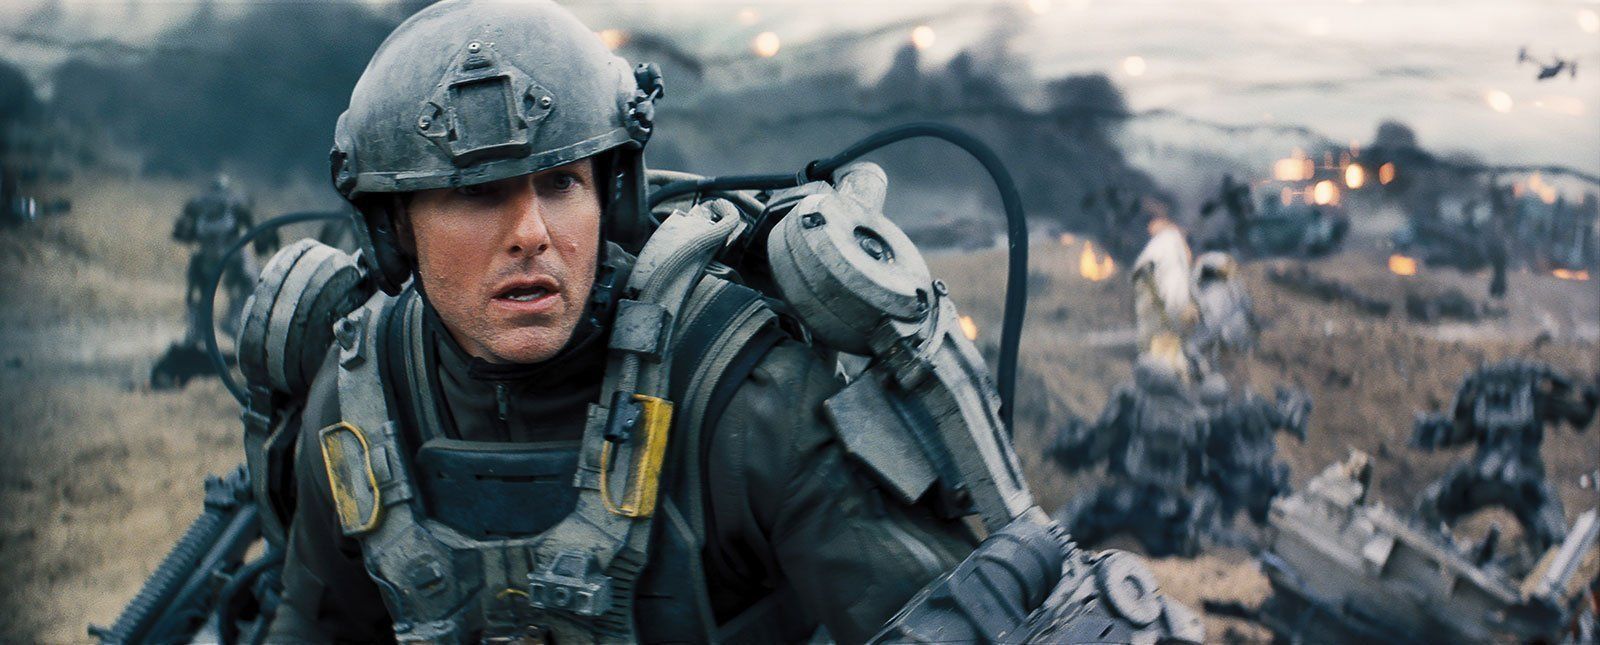 Edge Of Tomorrow : quand Un jour sans fin rencontre Independence Day #5